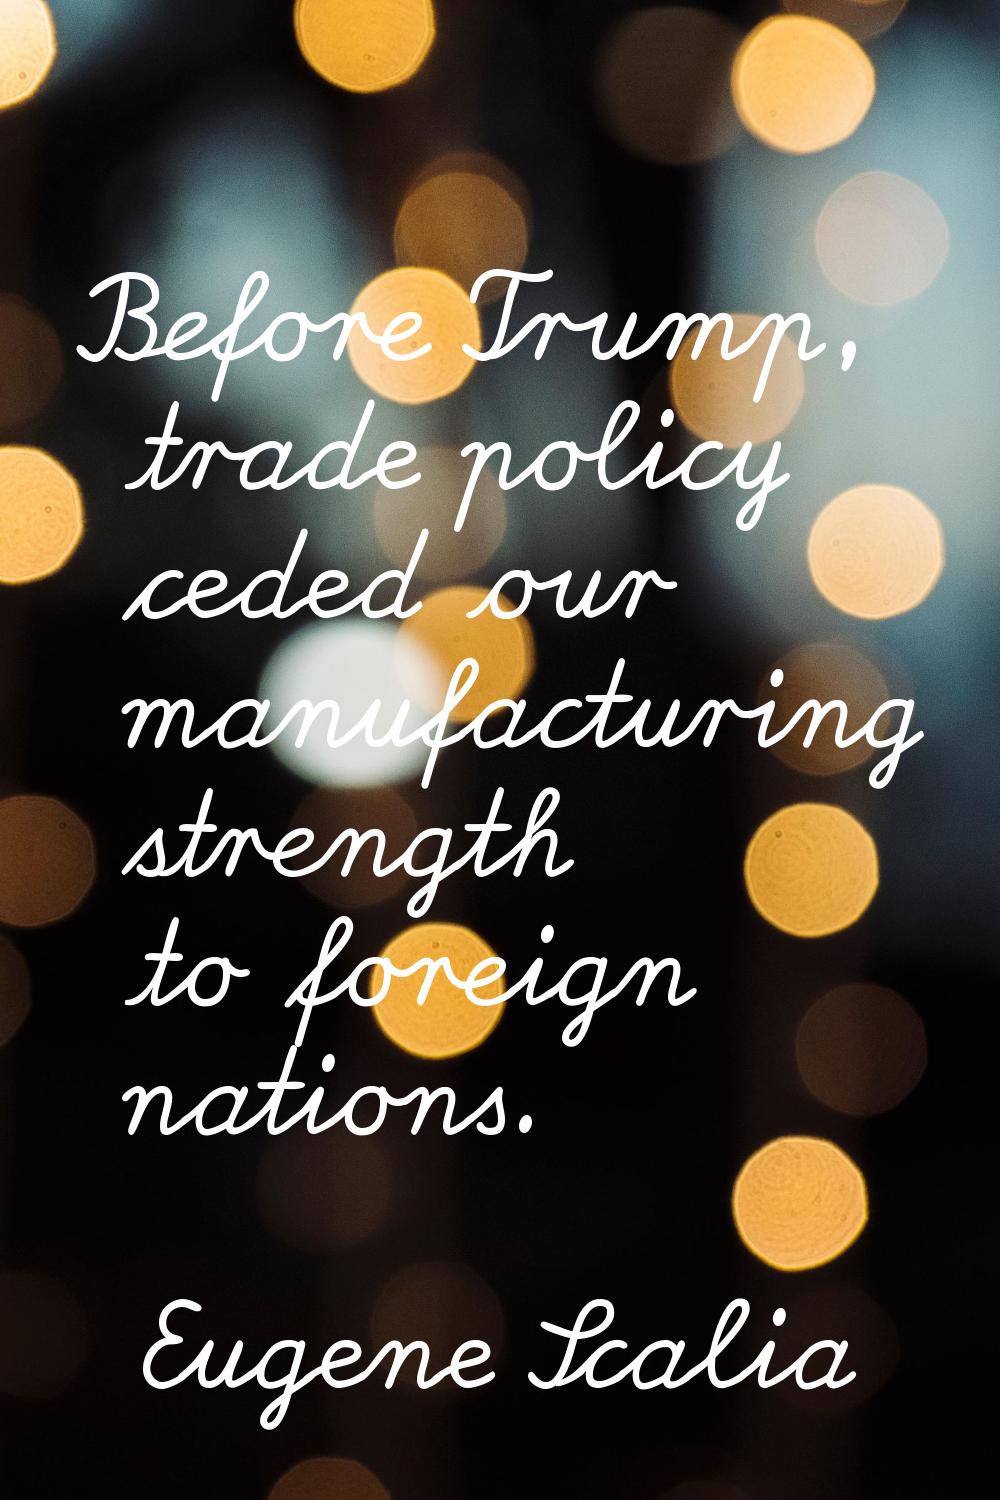 Before Trump, trade policy ceded our manufacturing strength to foreign nations.